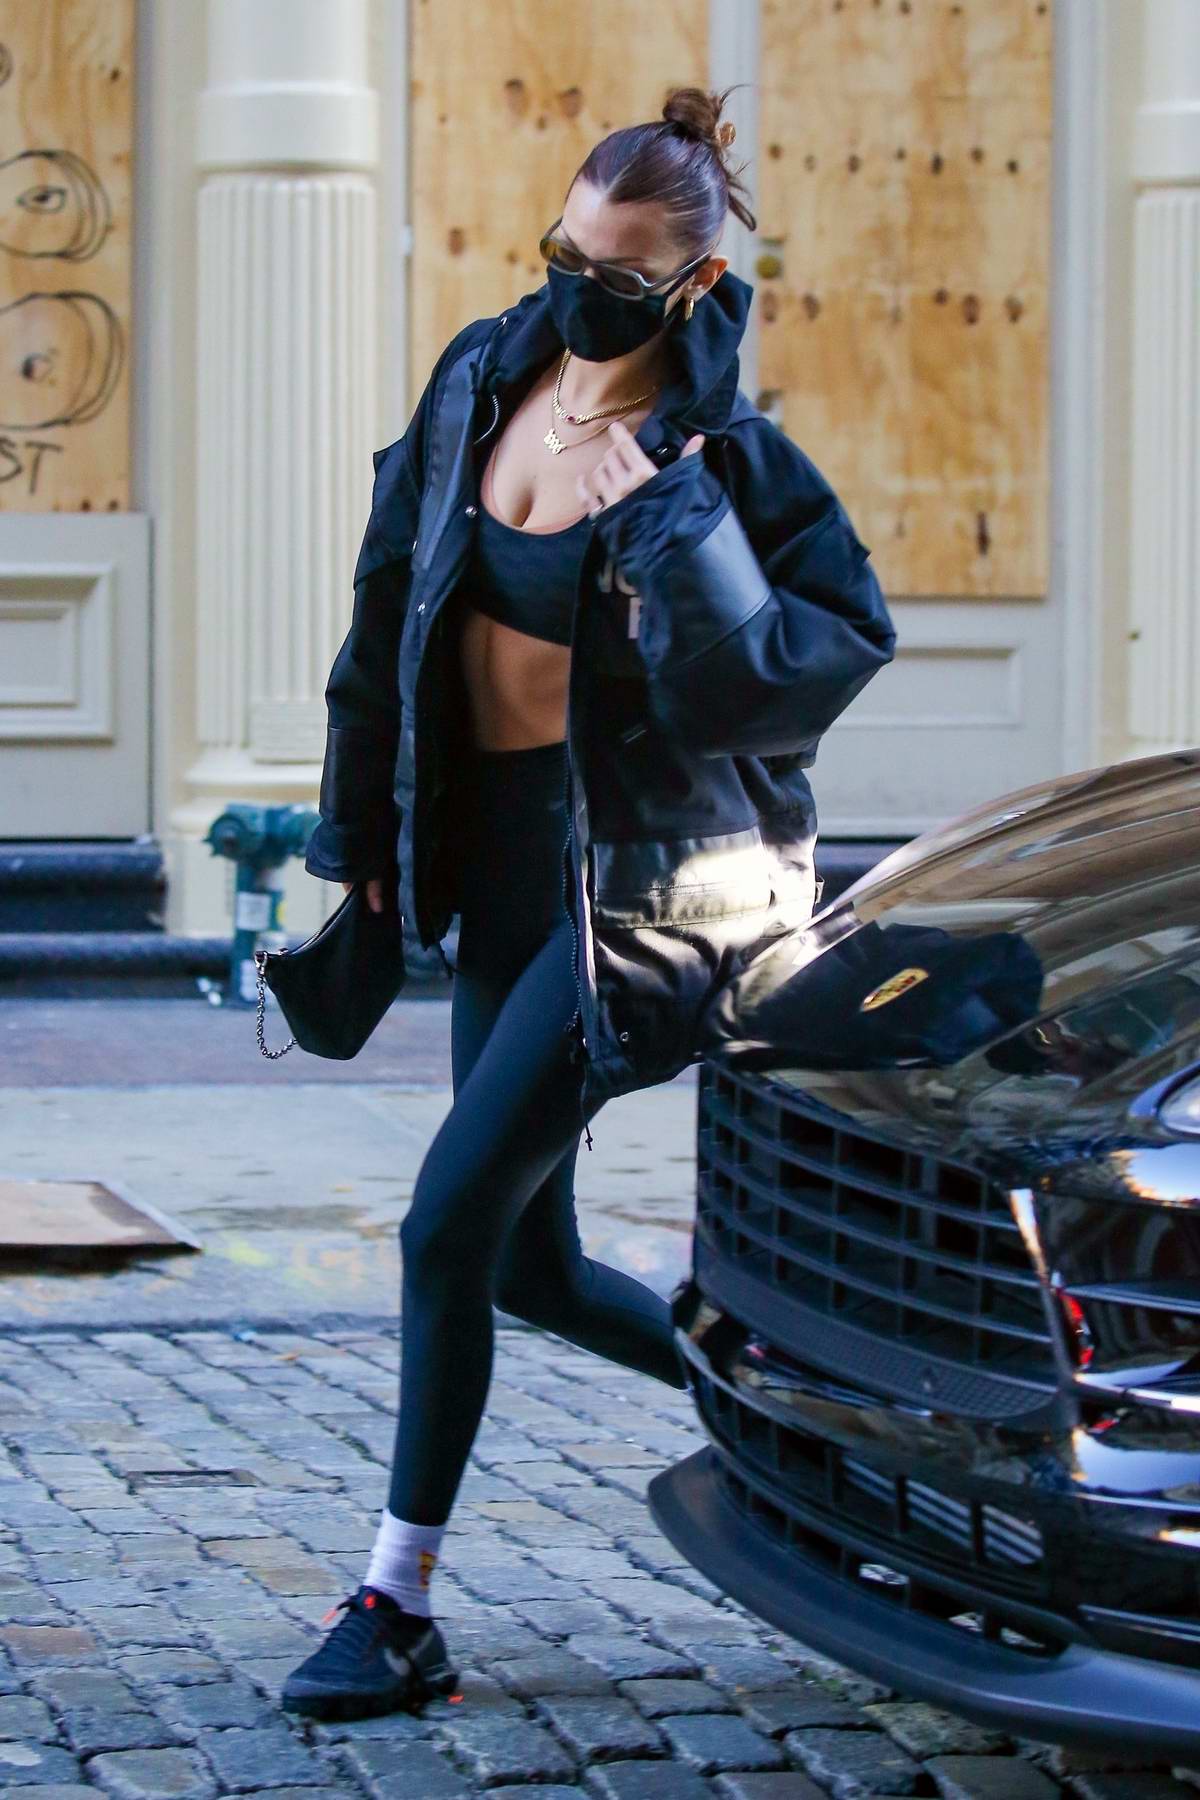 https://www.celebsfirst.com/wp-content/uploads/2020/12/bella-hadid-rocks-a-north-face-jacket-with-a-sports-bra-and-leggings-as-she-heads-to-the-gym-in-new-york-city-101220_2.jpg